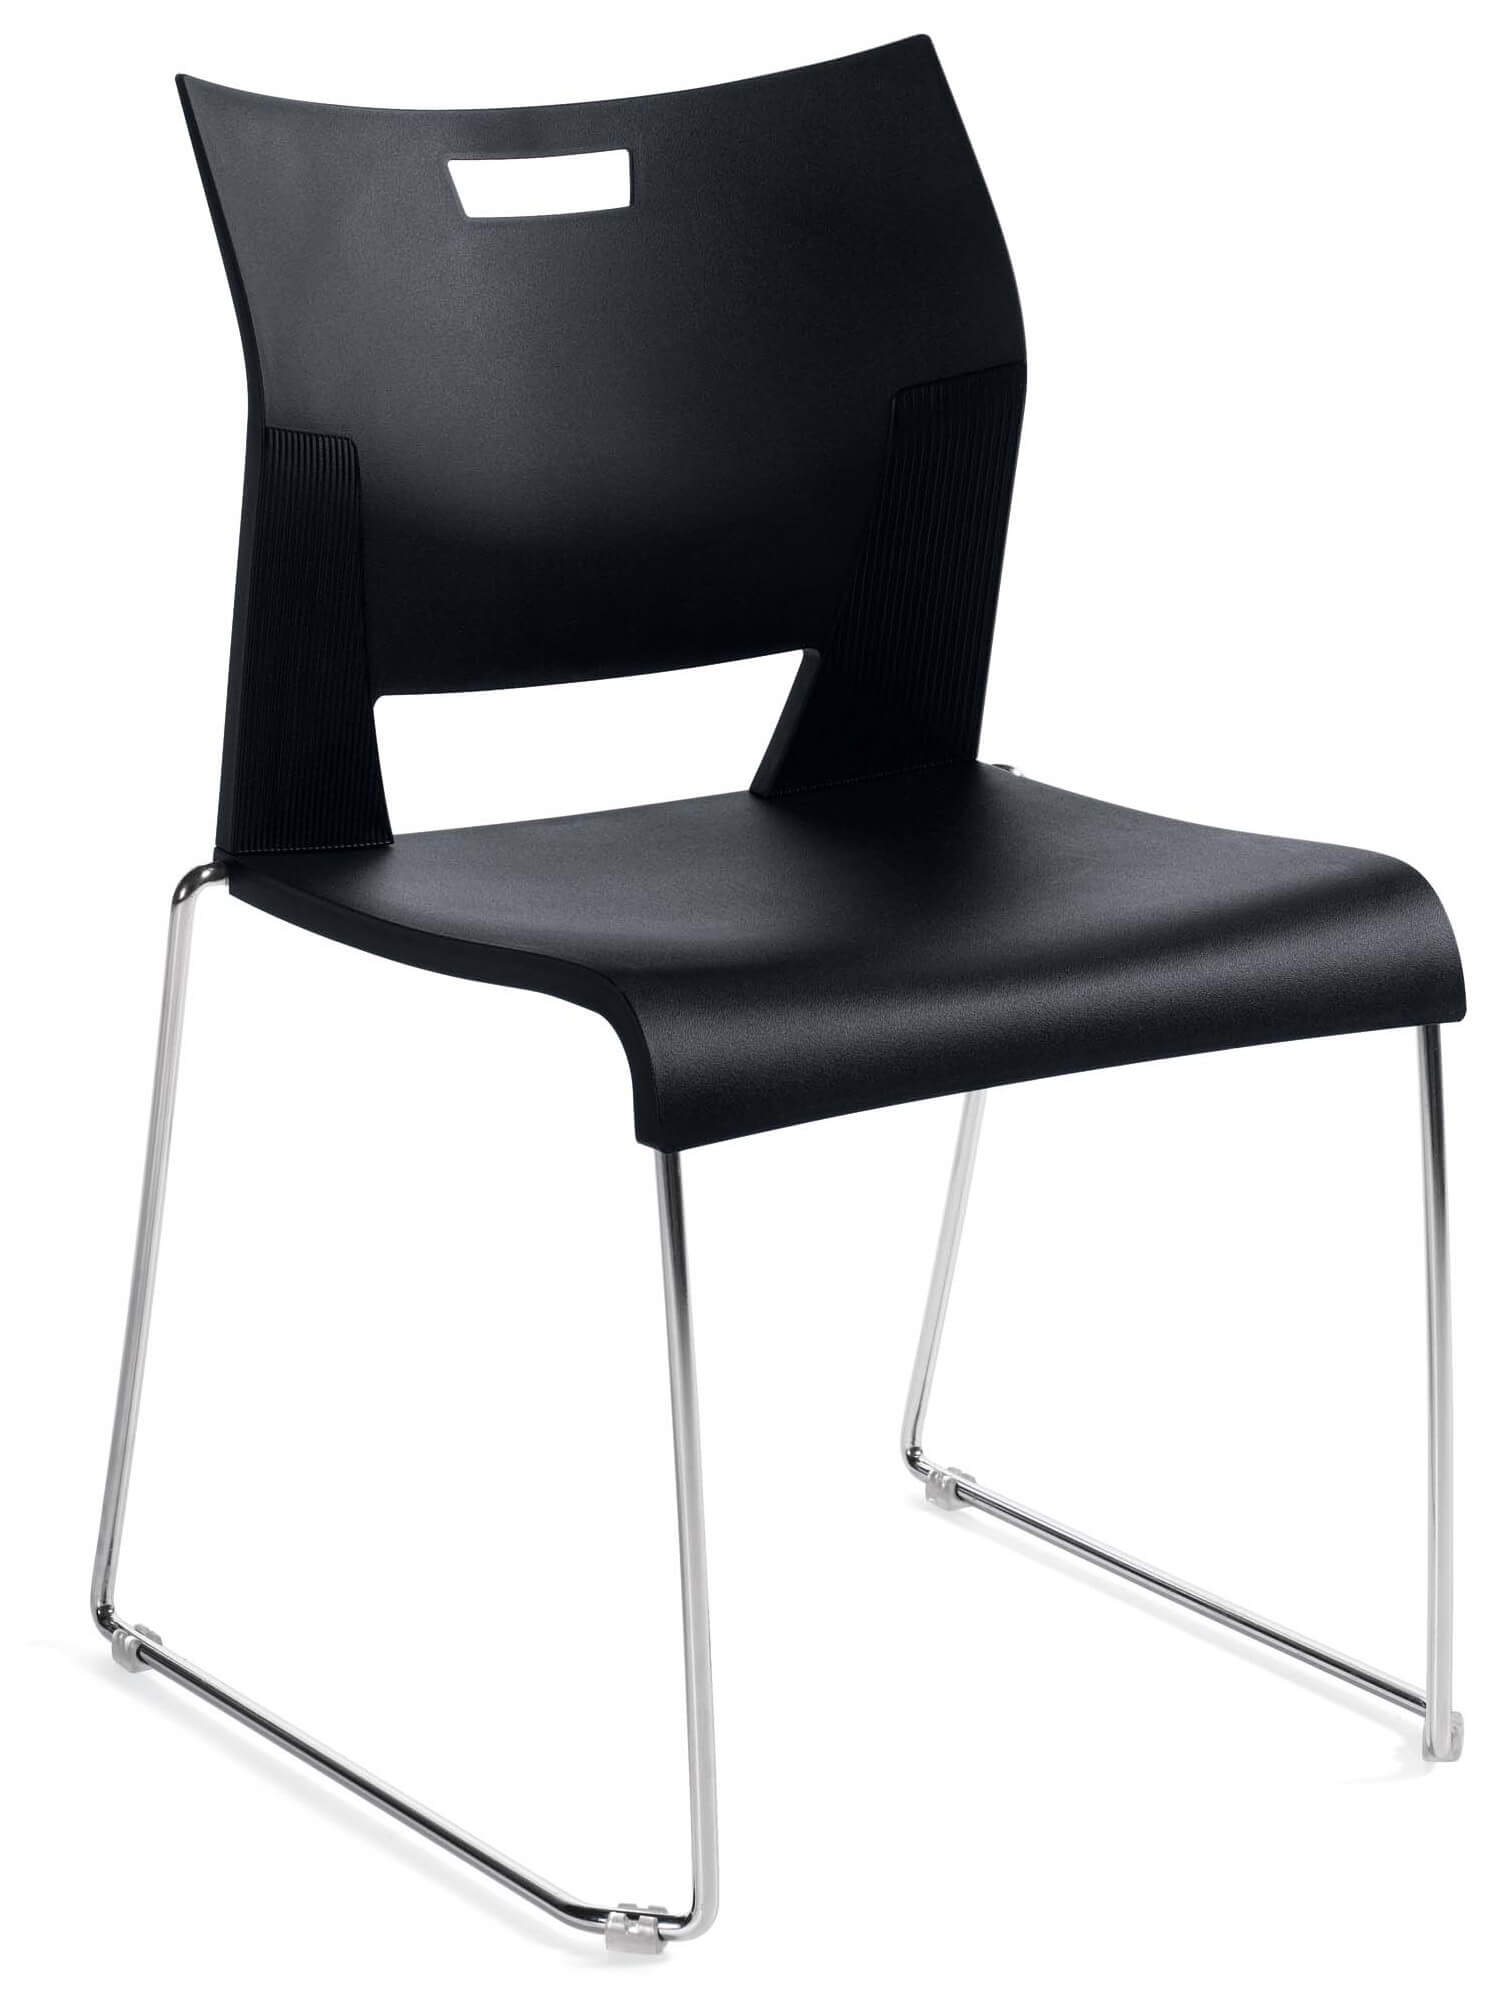 chairs-for-office-armless-office-chair.jpg